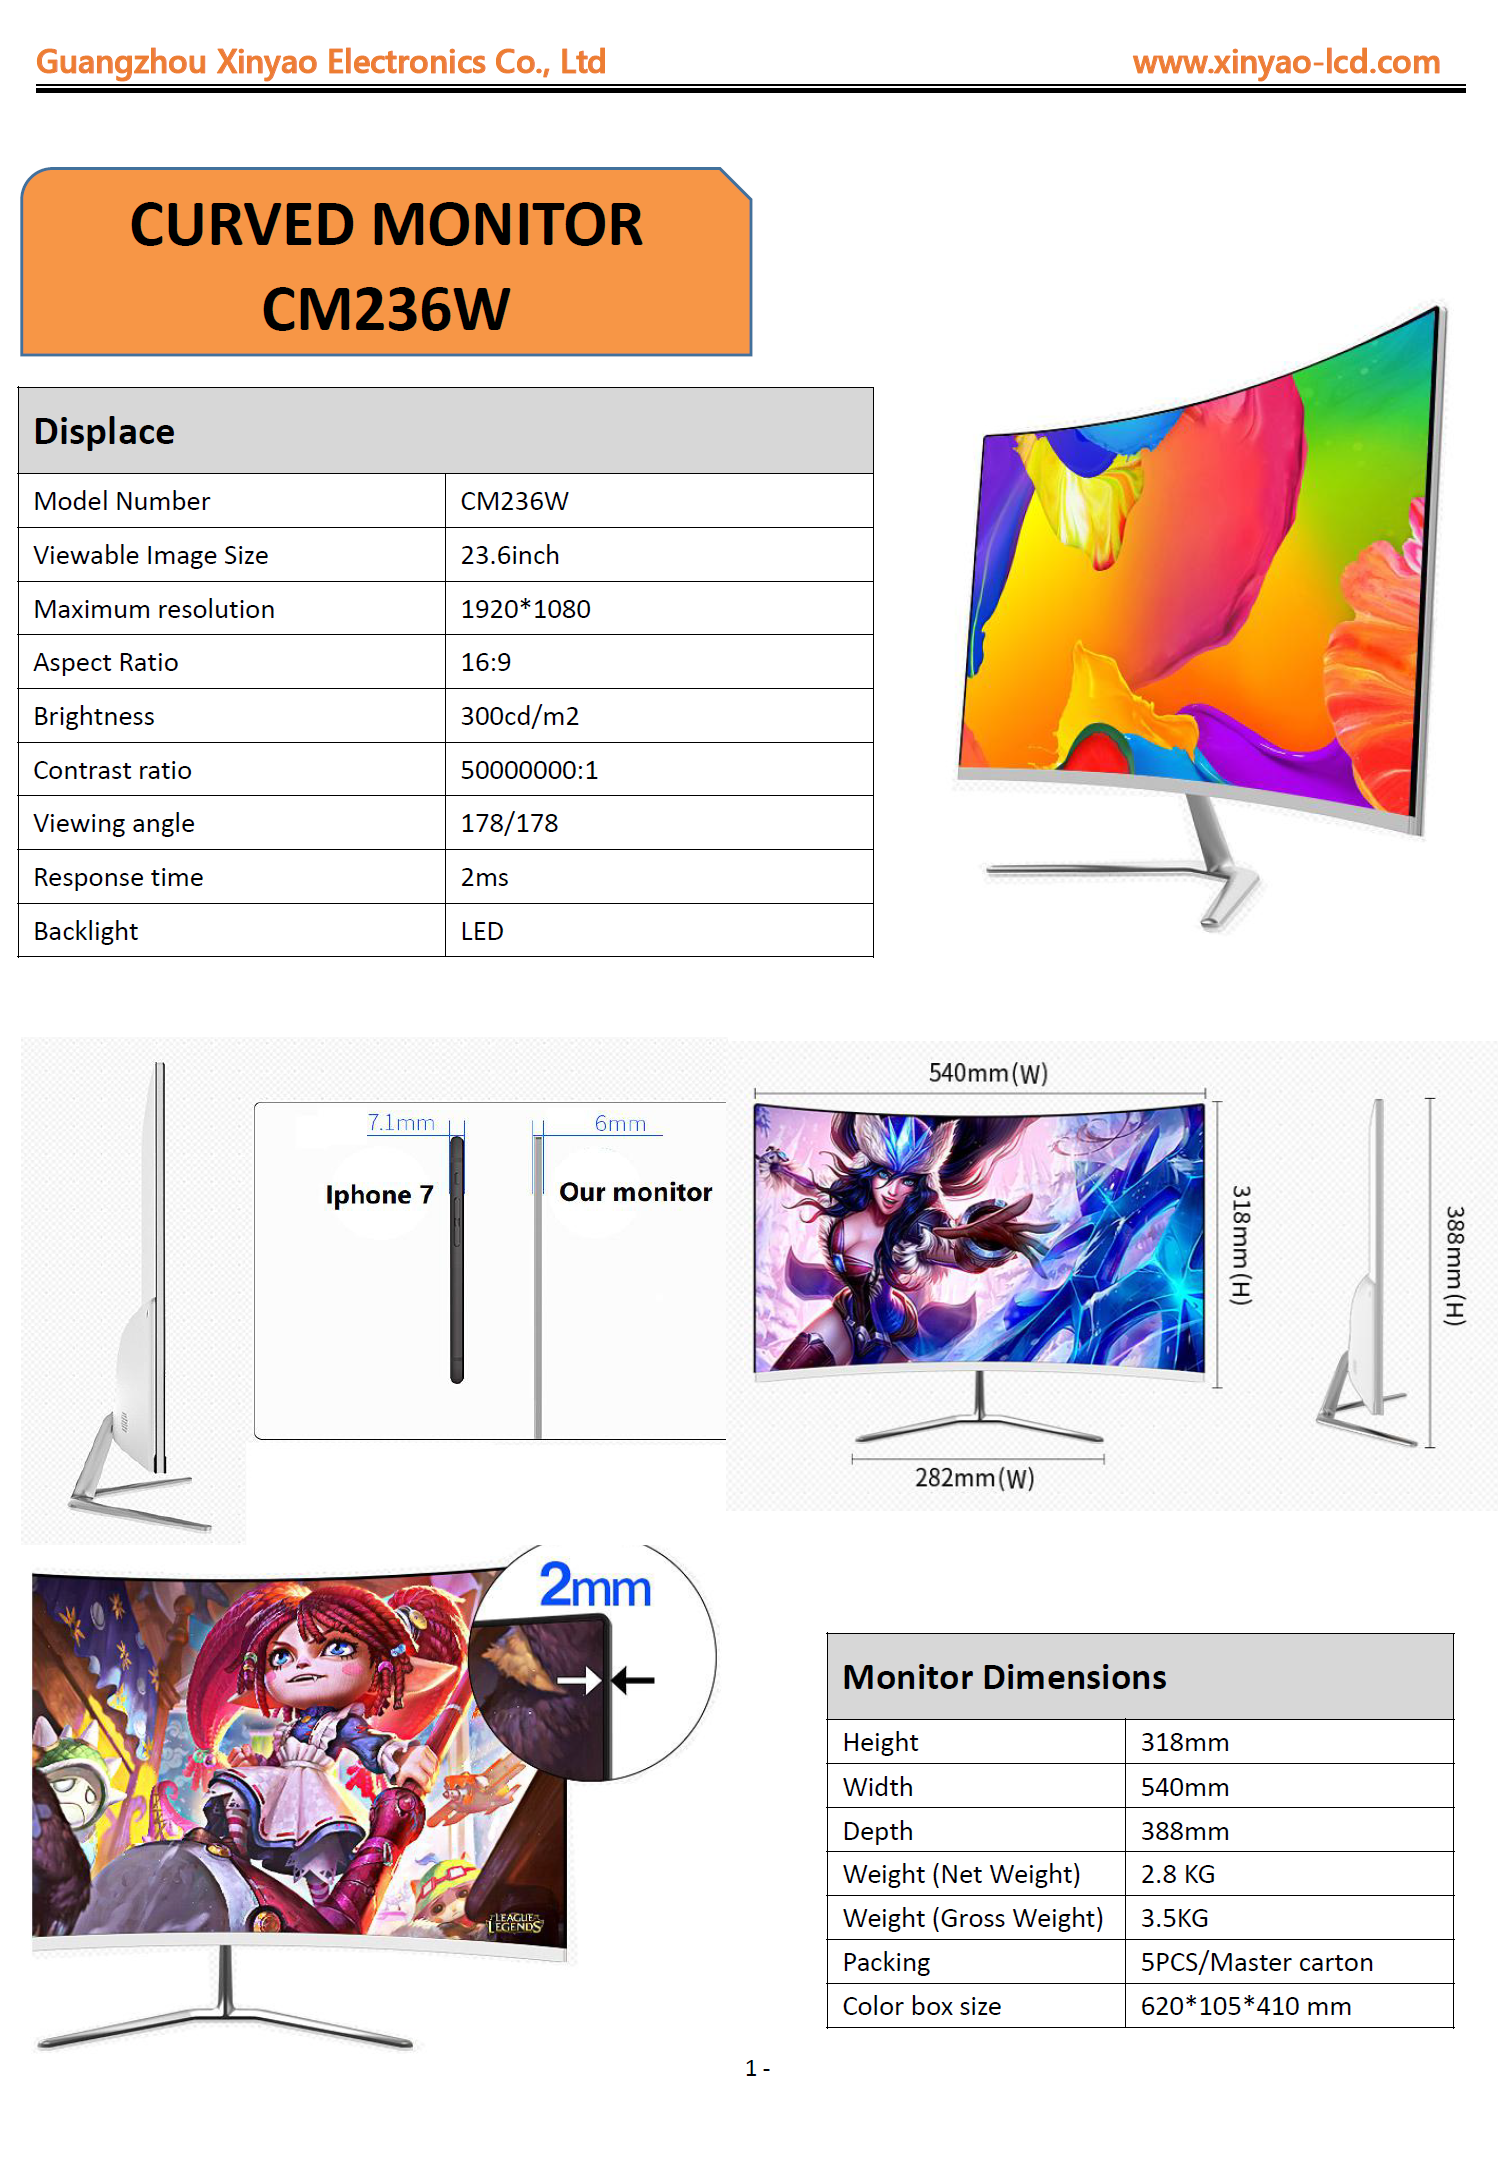 gaming 24 inch 1080p monitor manufacturer for lcd screen